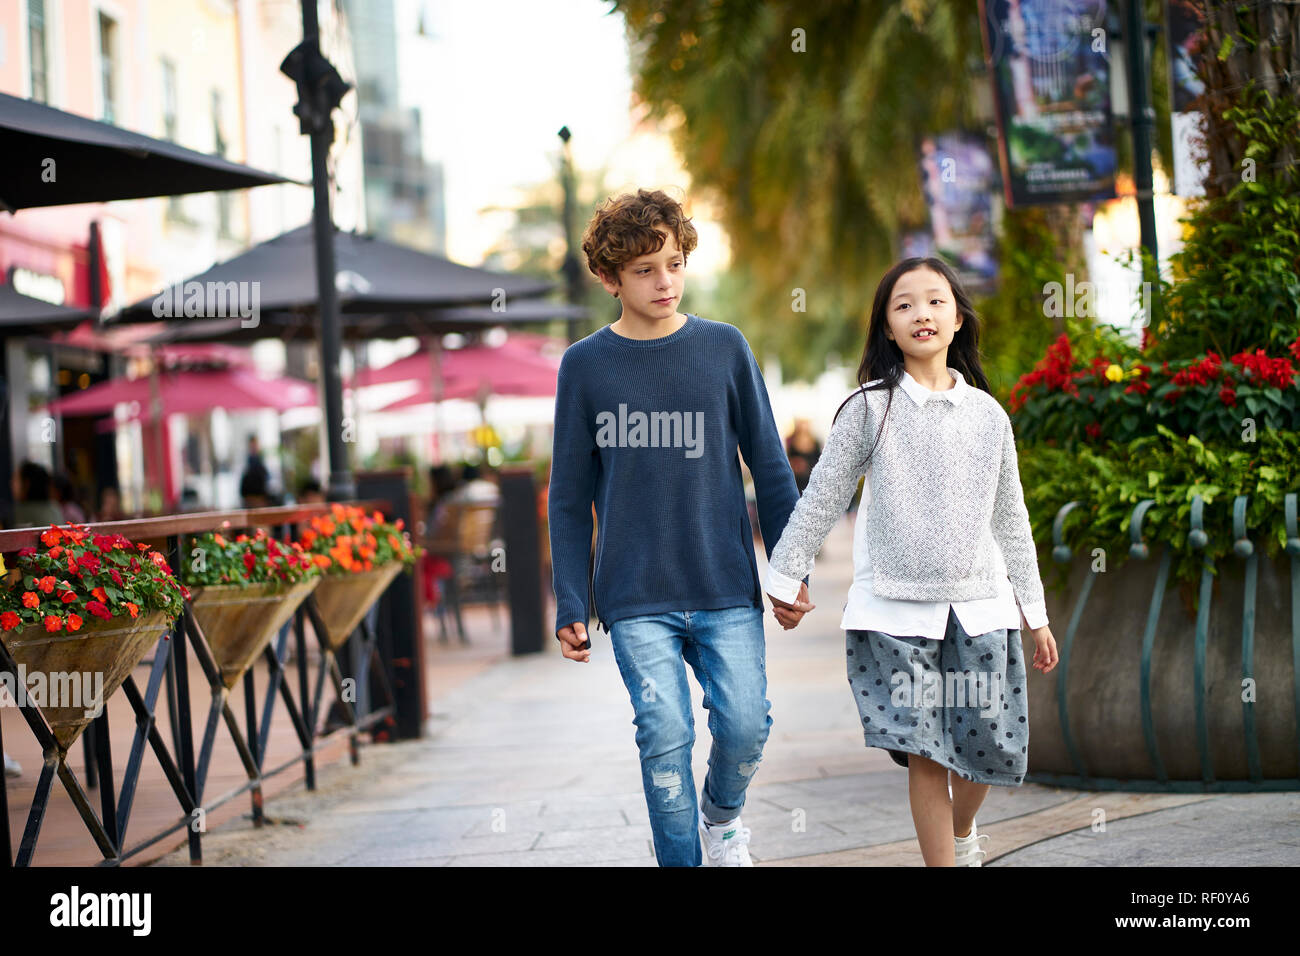 little asian girl and caucasian boy walking together holding hands outdoors Stock Photo